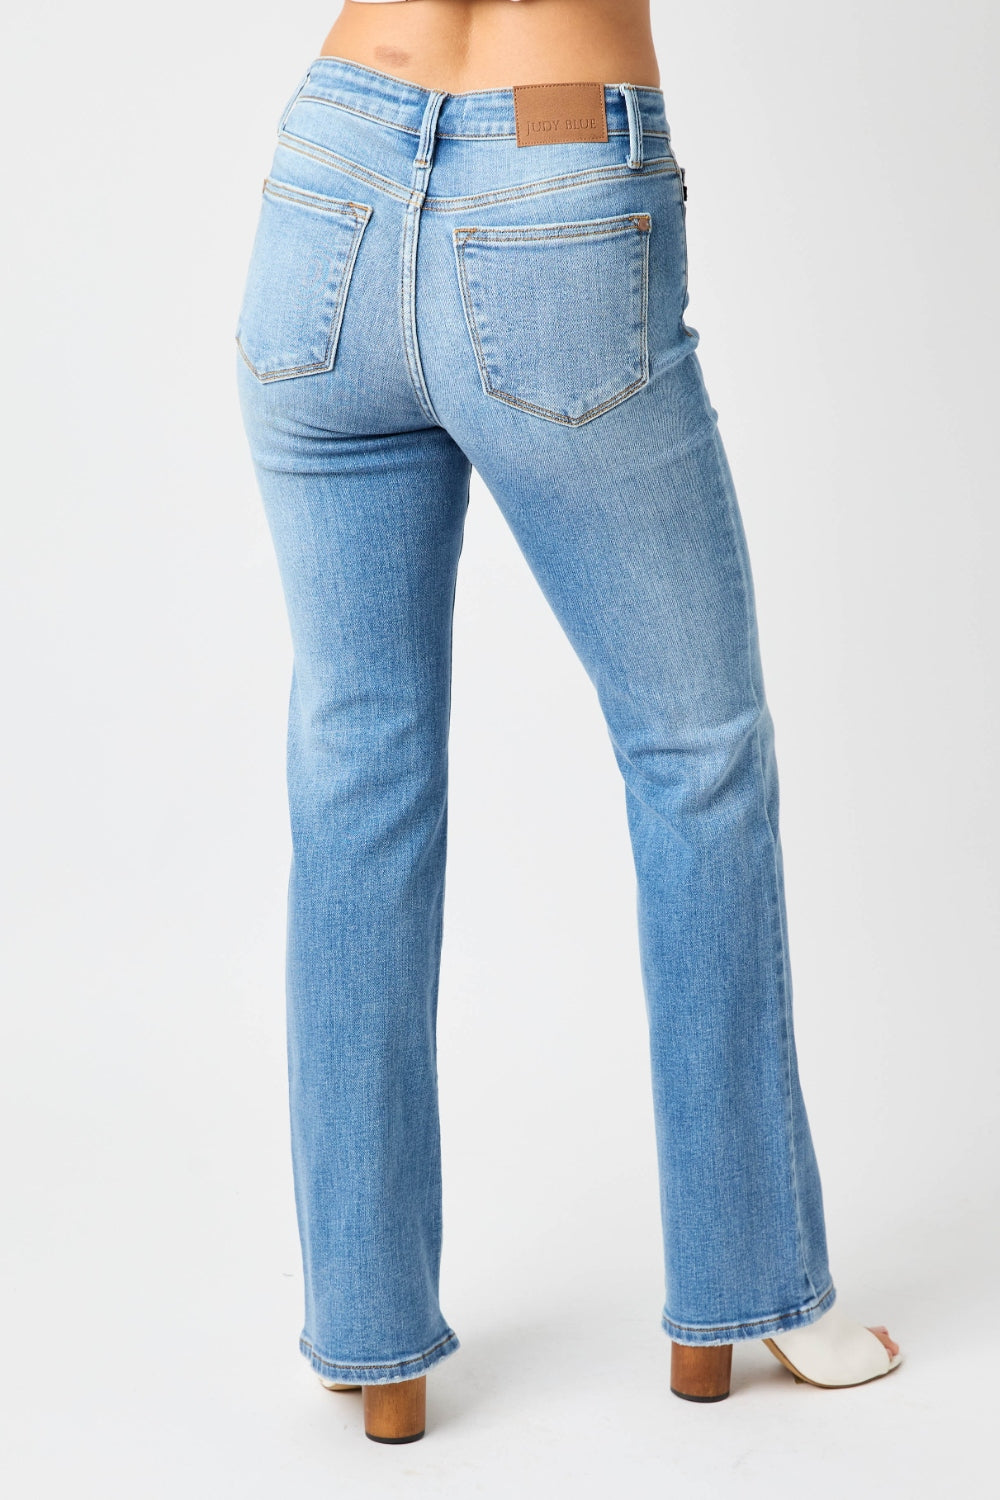 These high waist straight jeans are a timeless and classic wardrobe essential. The high waist design elongates the legs and provides a flattering silhouette. The straight leg cut offers a versatile and polished look that is easy to style. Pair them with a tucked-in blouse or a cropped top for a chic outfit. 0-24W